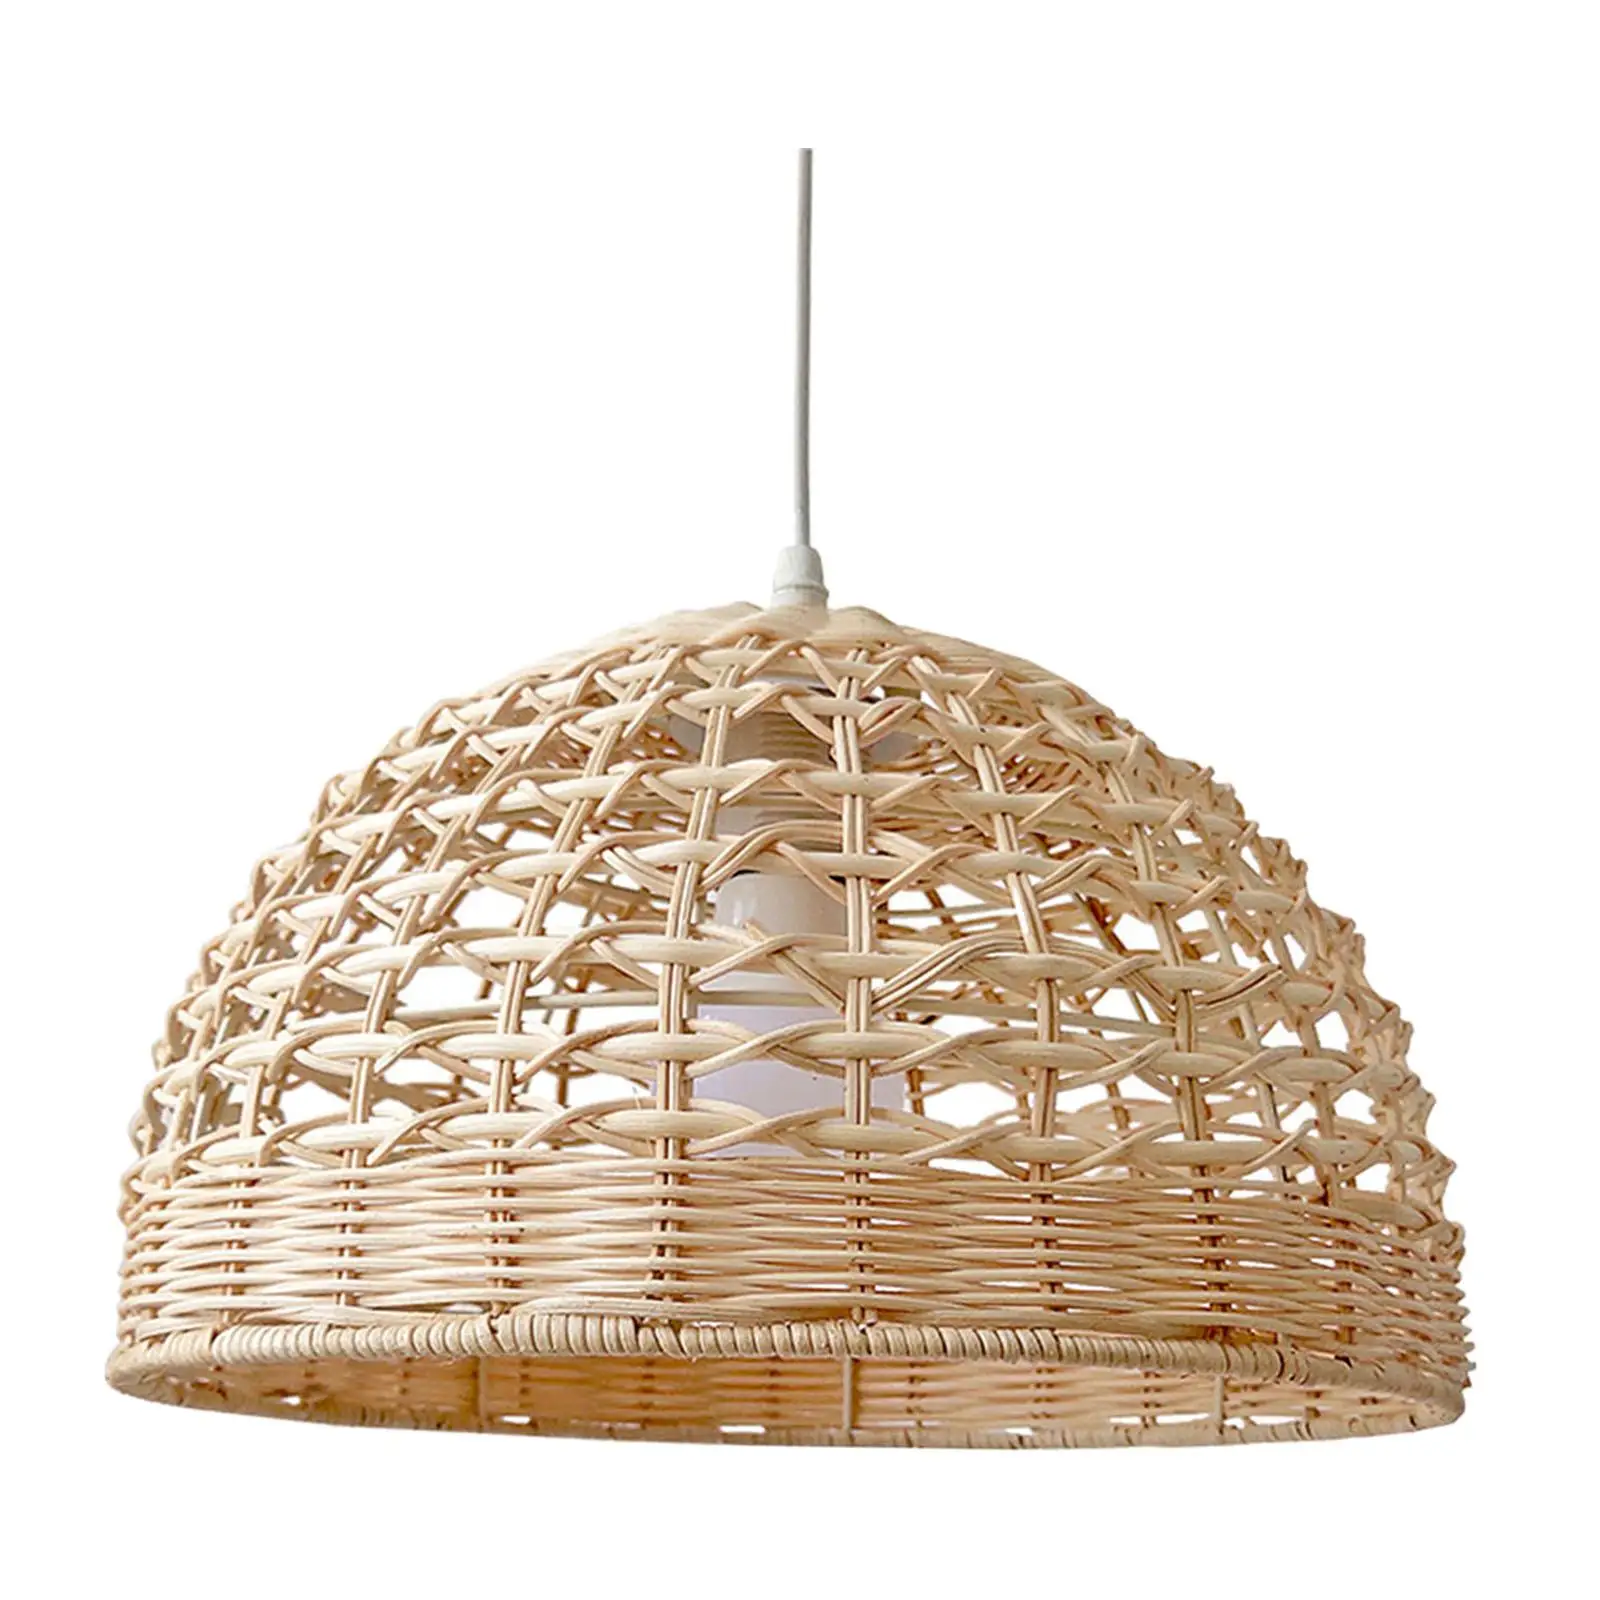 Rattan Lampshade Rattan Chandelier Lampshade Wicker Pendant Light Cover for - $28.90